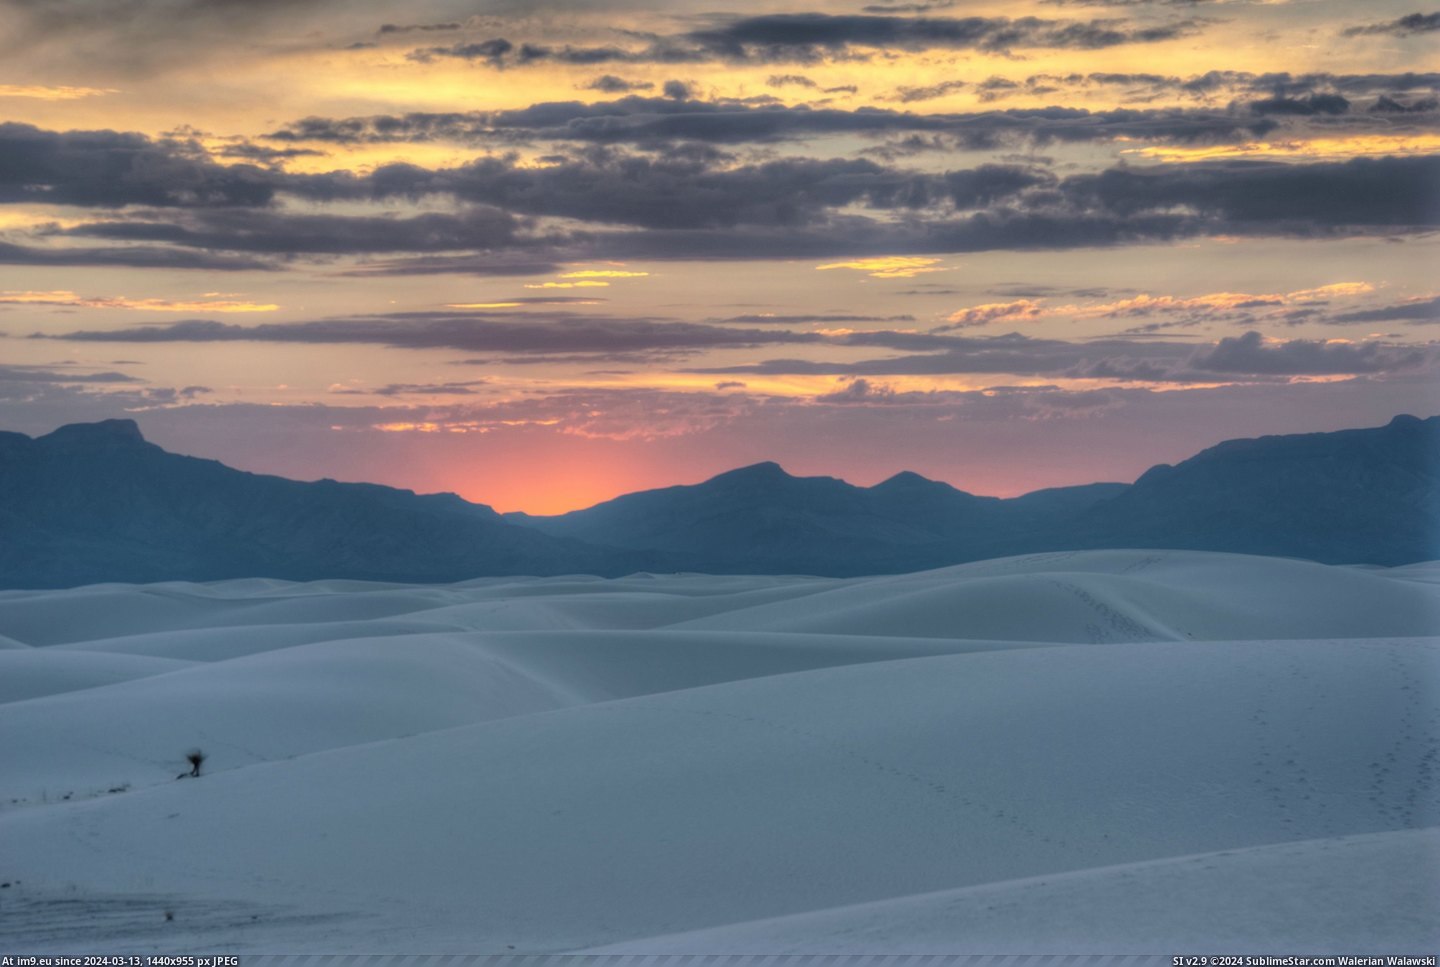 #Photo #Love #Sands #Whites #Aaron #Sunset #Visiting [Earthporn] Love visiting Whites Sands, NM at sunset. Photo by Aaron B  [5930x3954]. Pic. (Изображение из альбом My r/EARTHPORN favs))